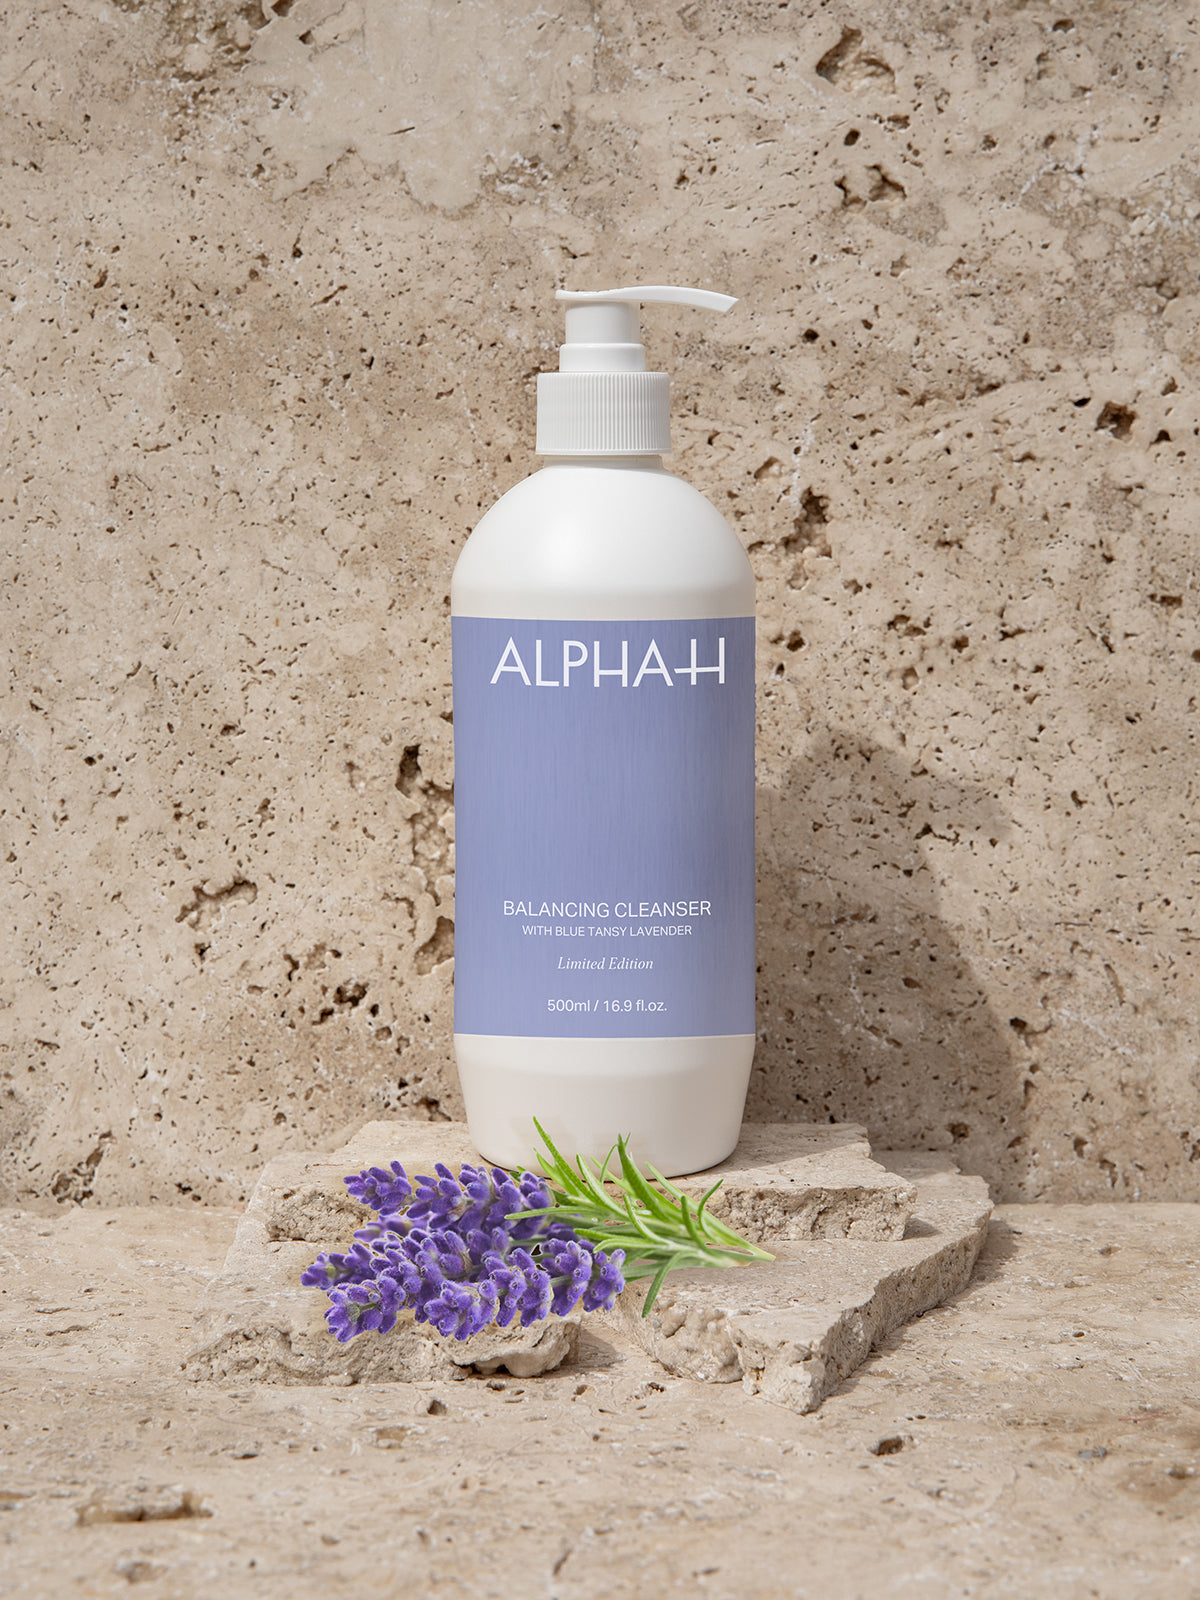 Balancing Cleanser with Blue Tansy Lavender